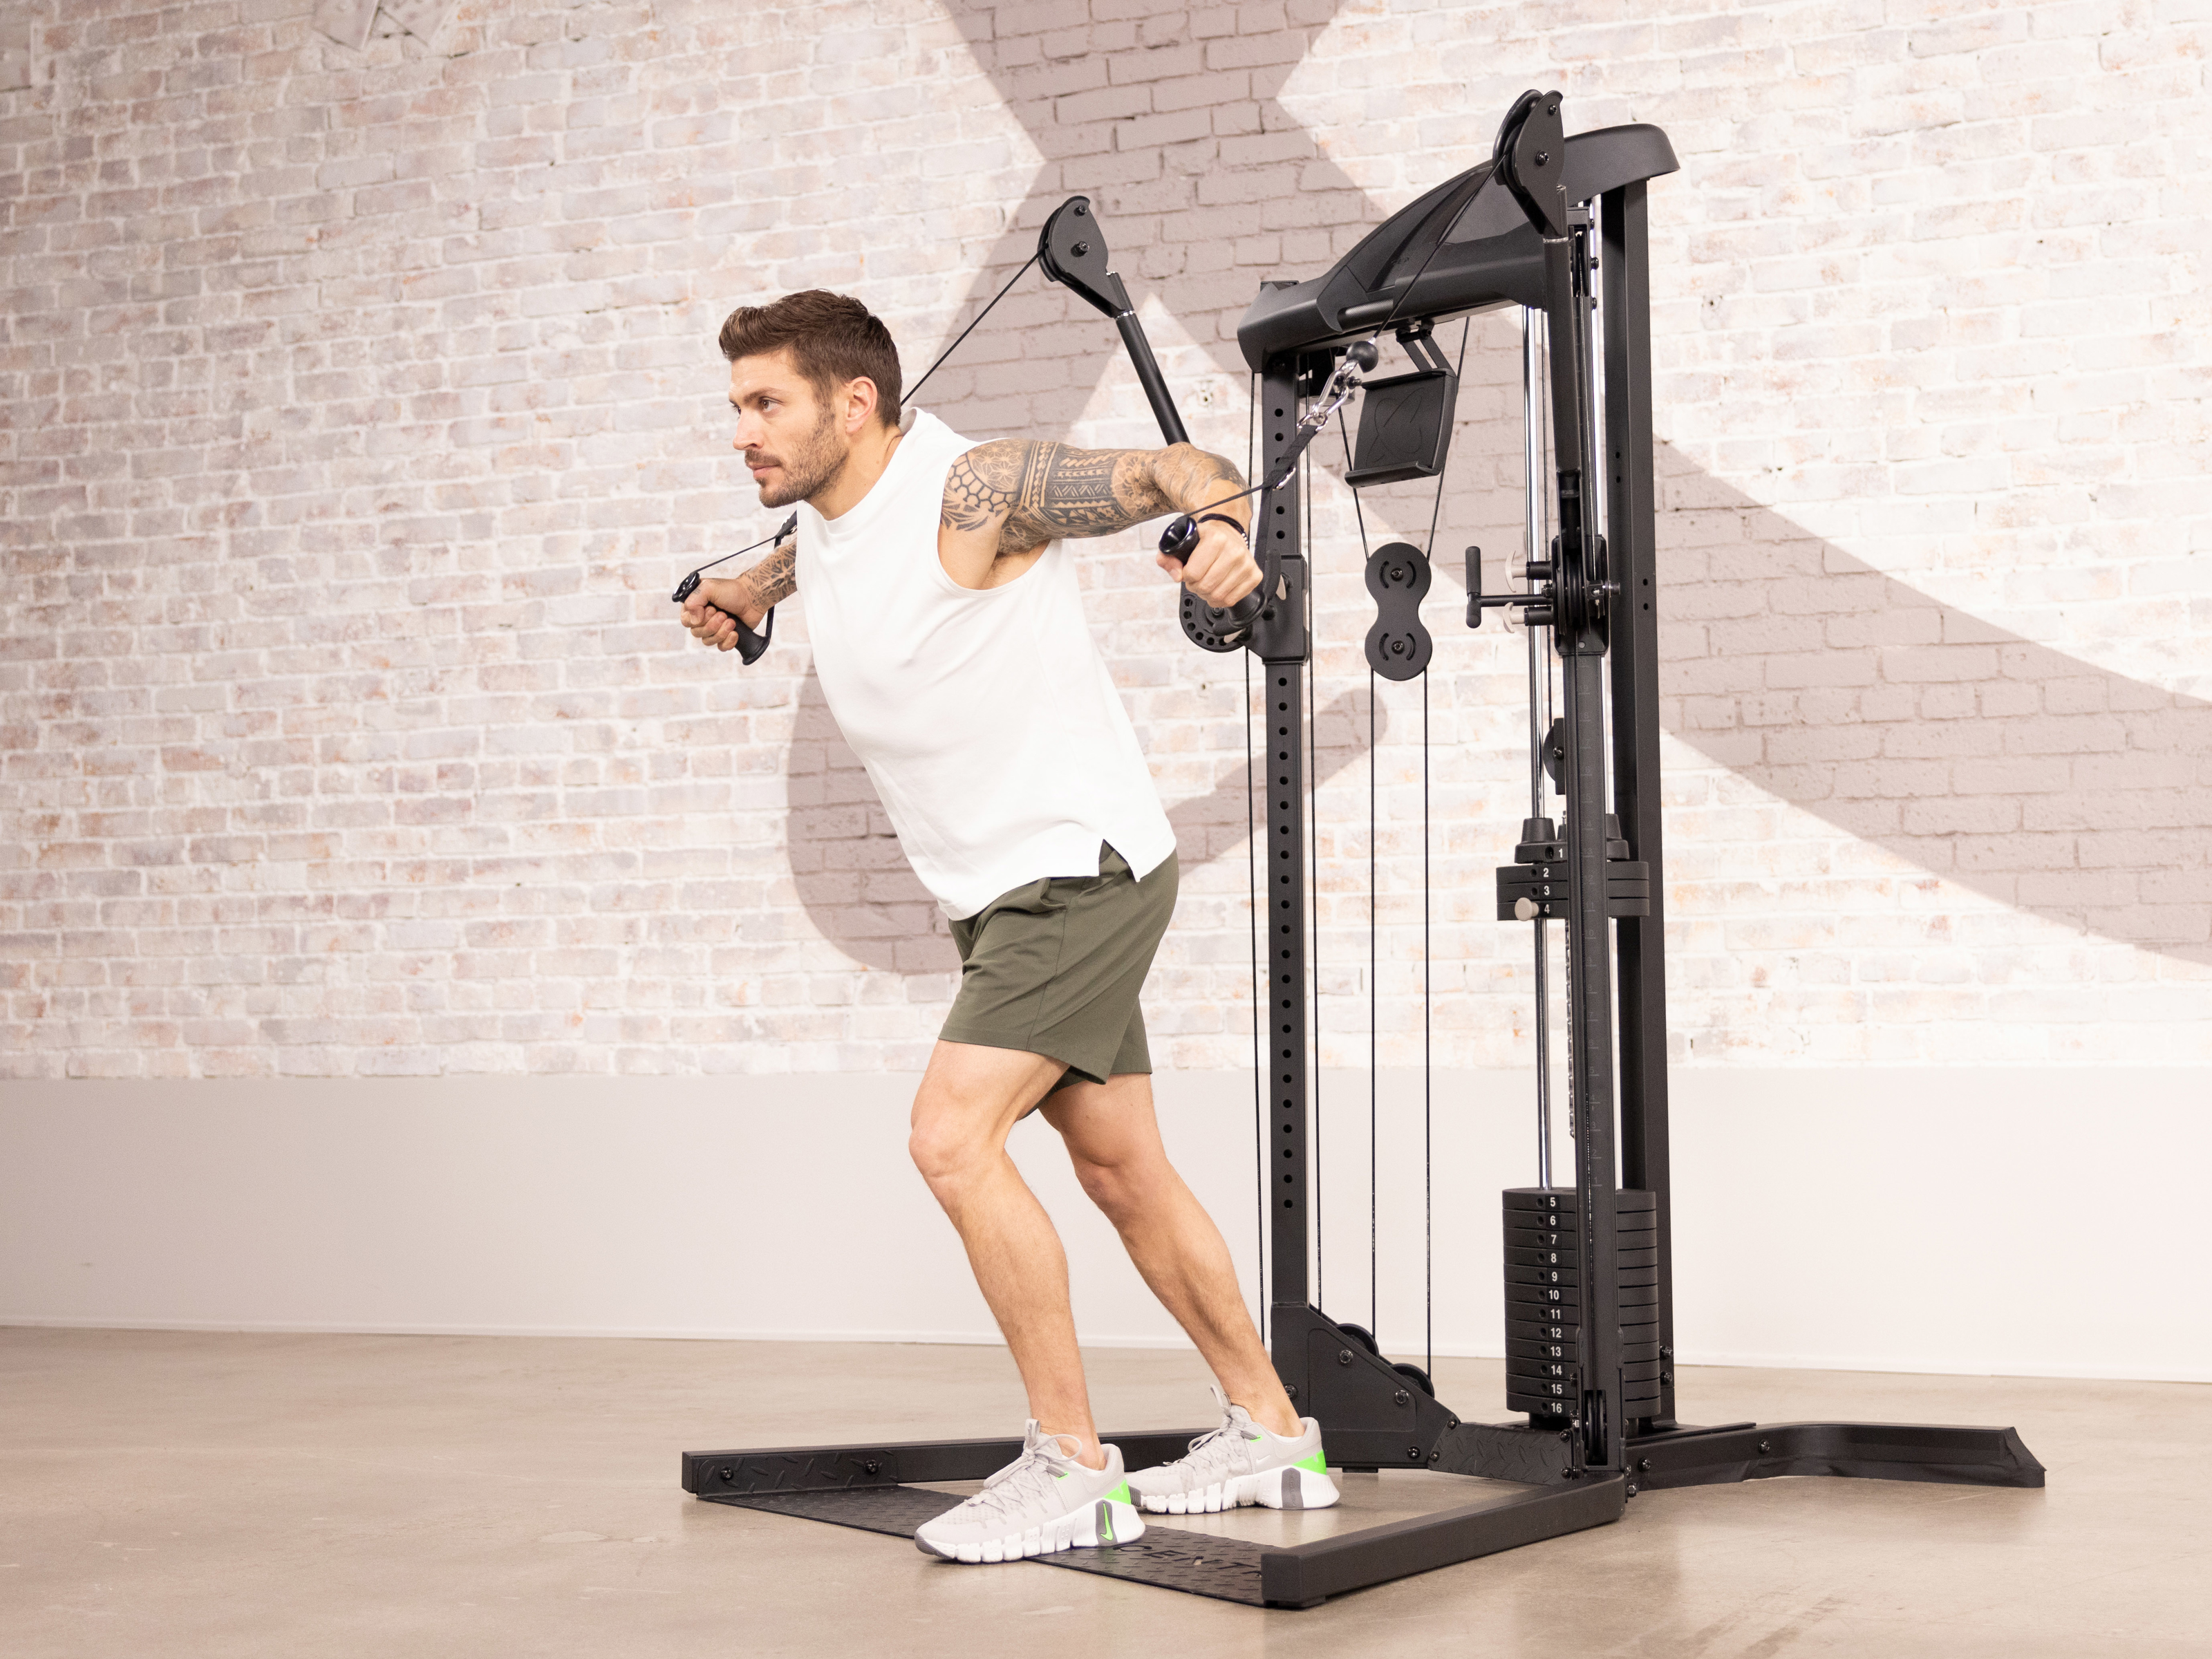 Wondering if Cardio Sculpt is a good fit for you? Here's what you